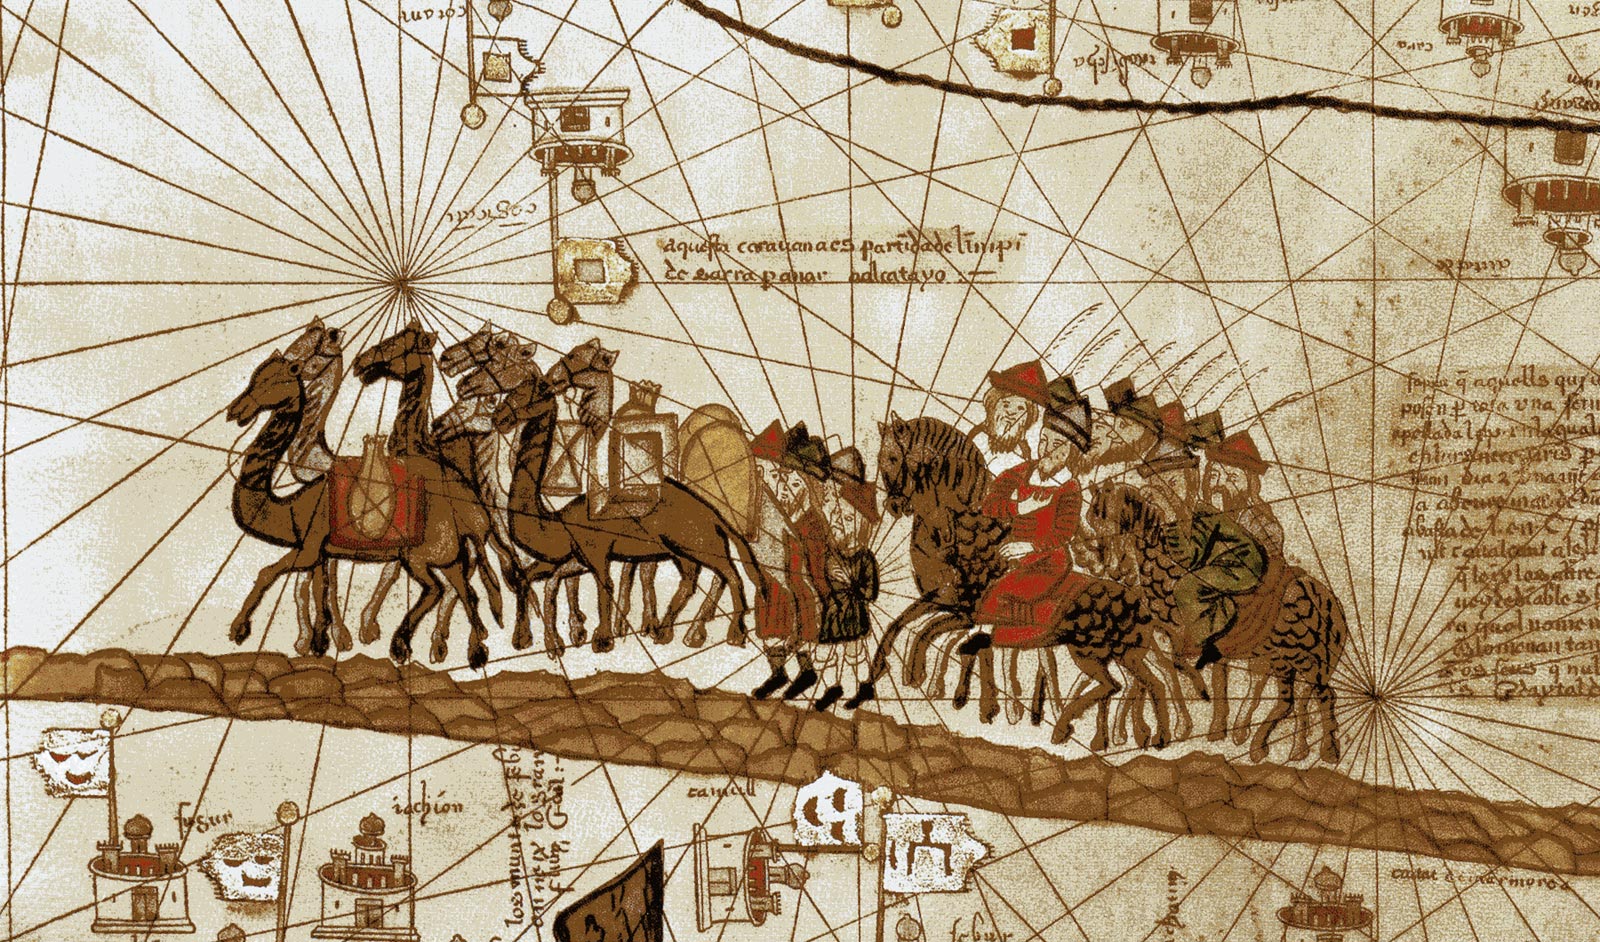 The caravan of Marco Polo traveling to India